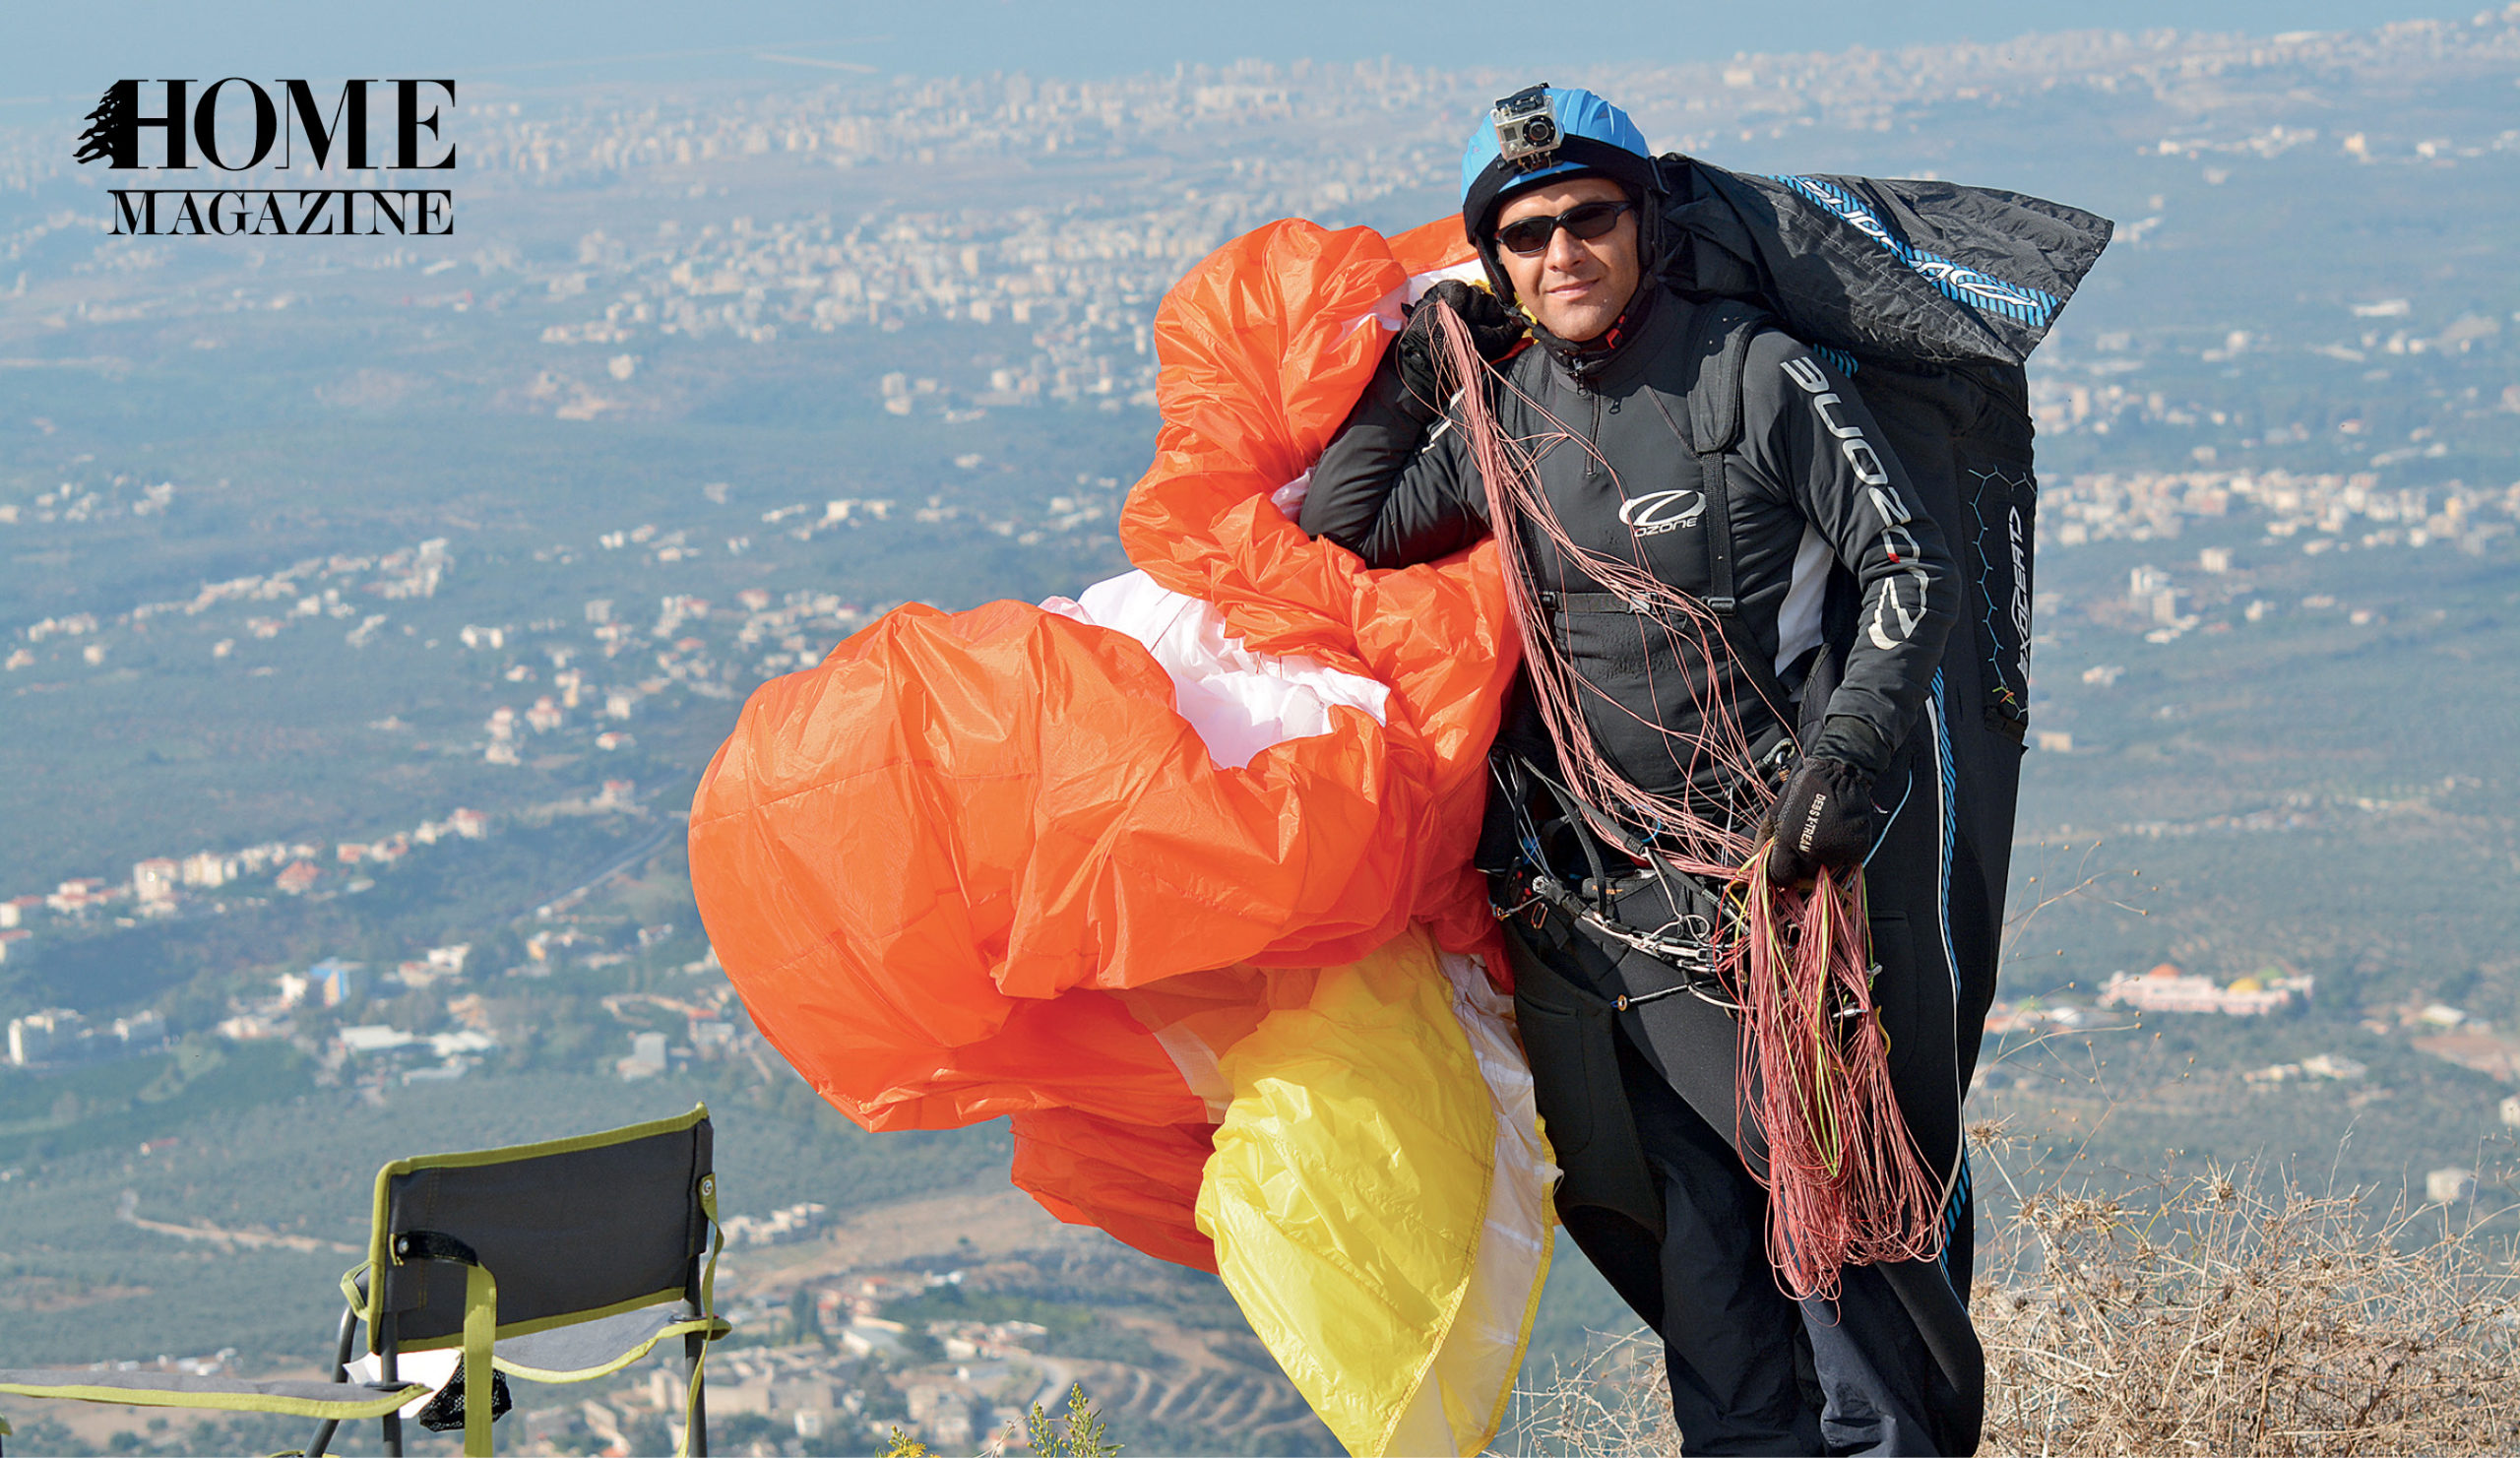 A man in black costume, helmet and sunglasses holding a foiled red and yellow parachute